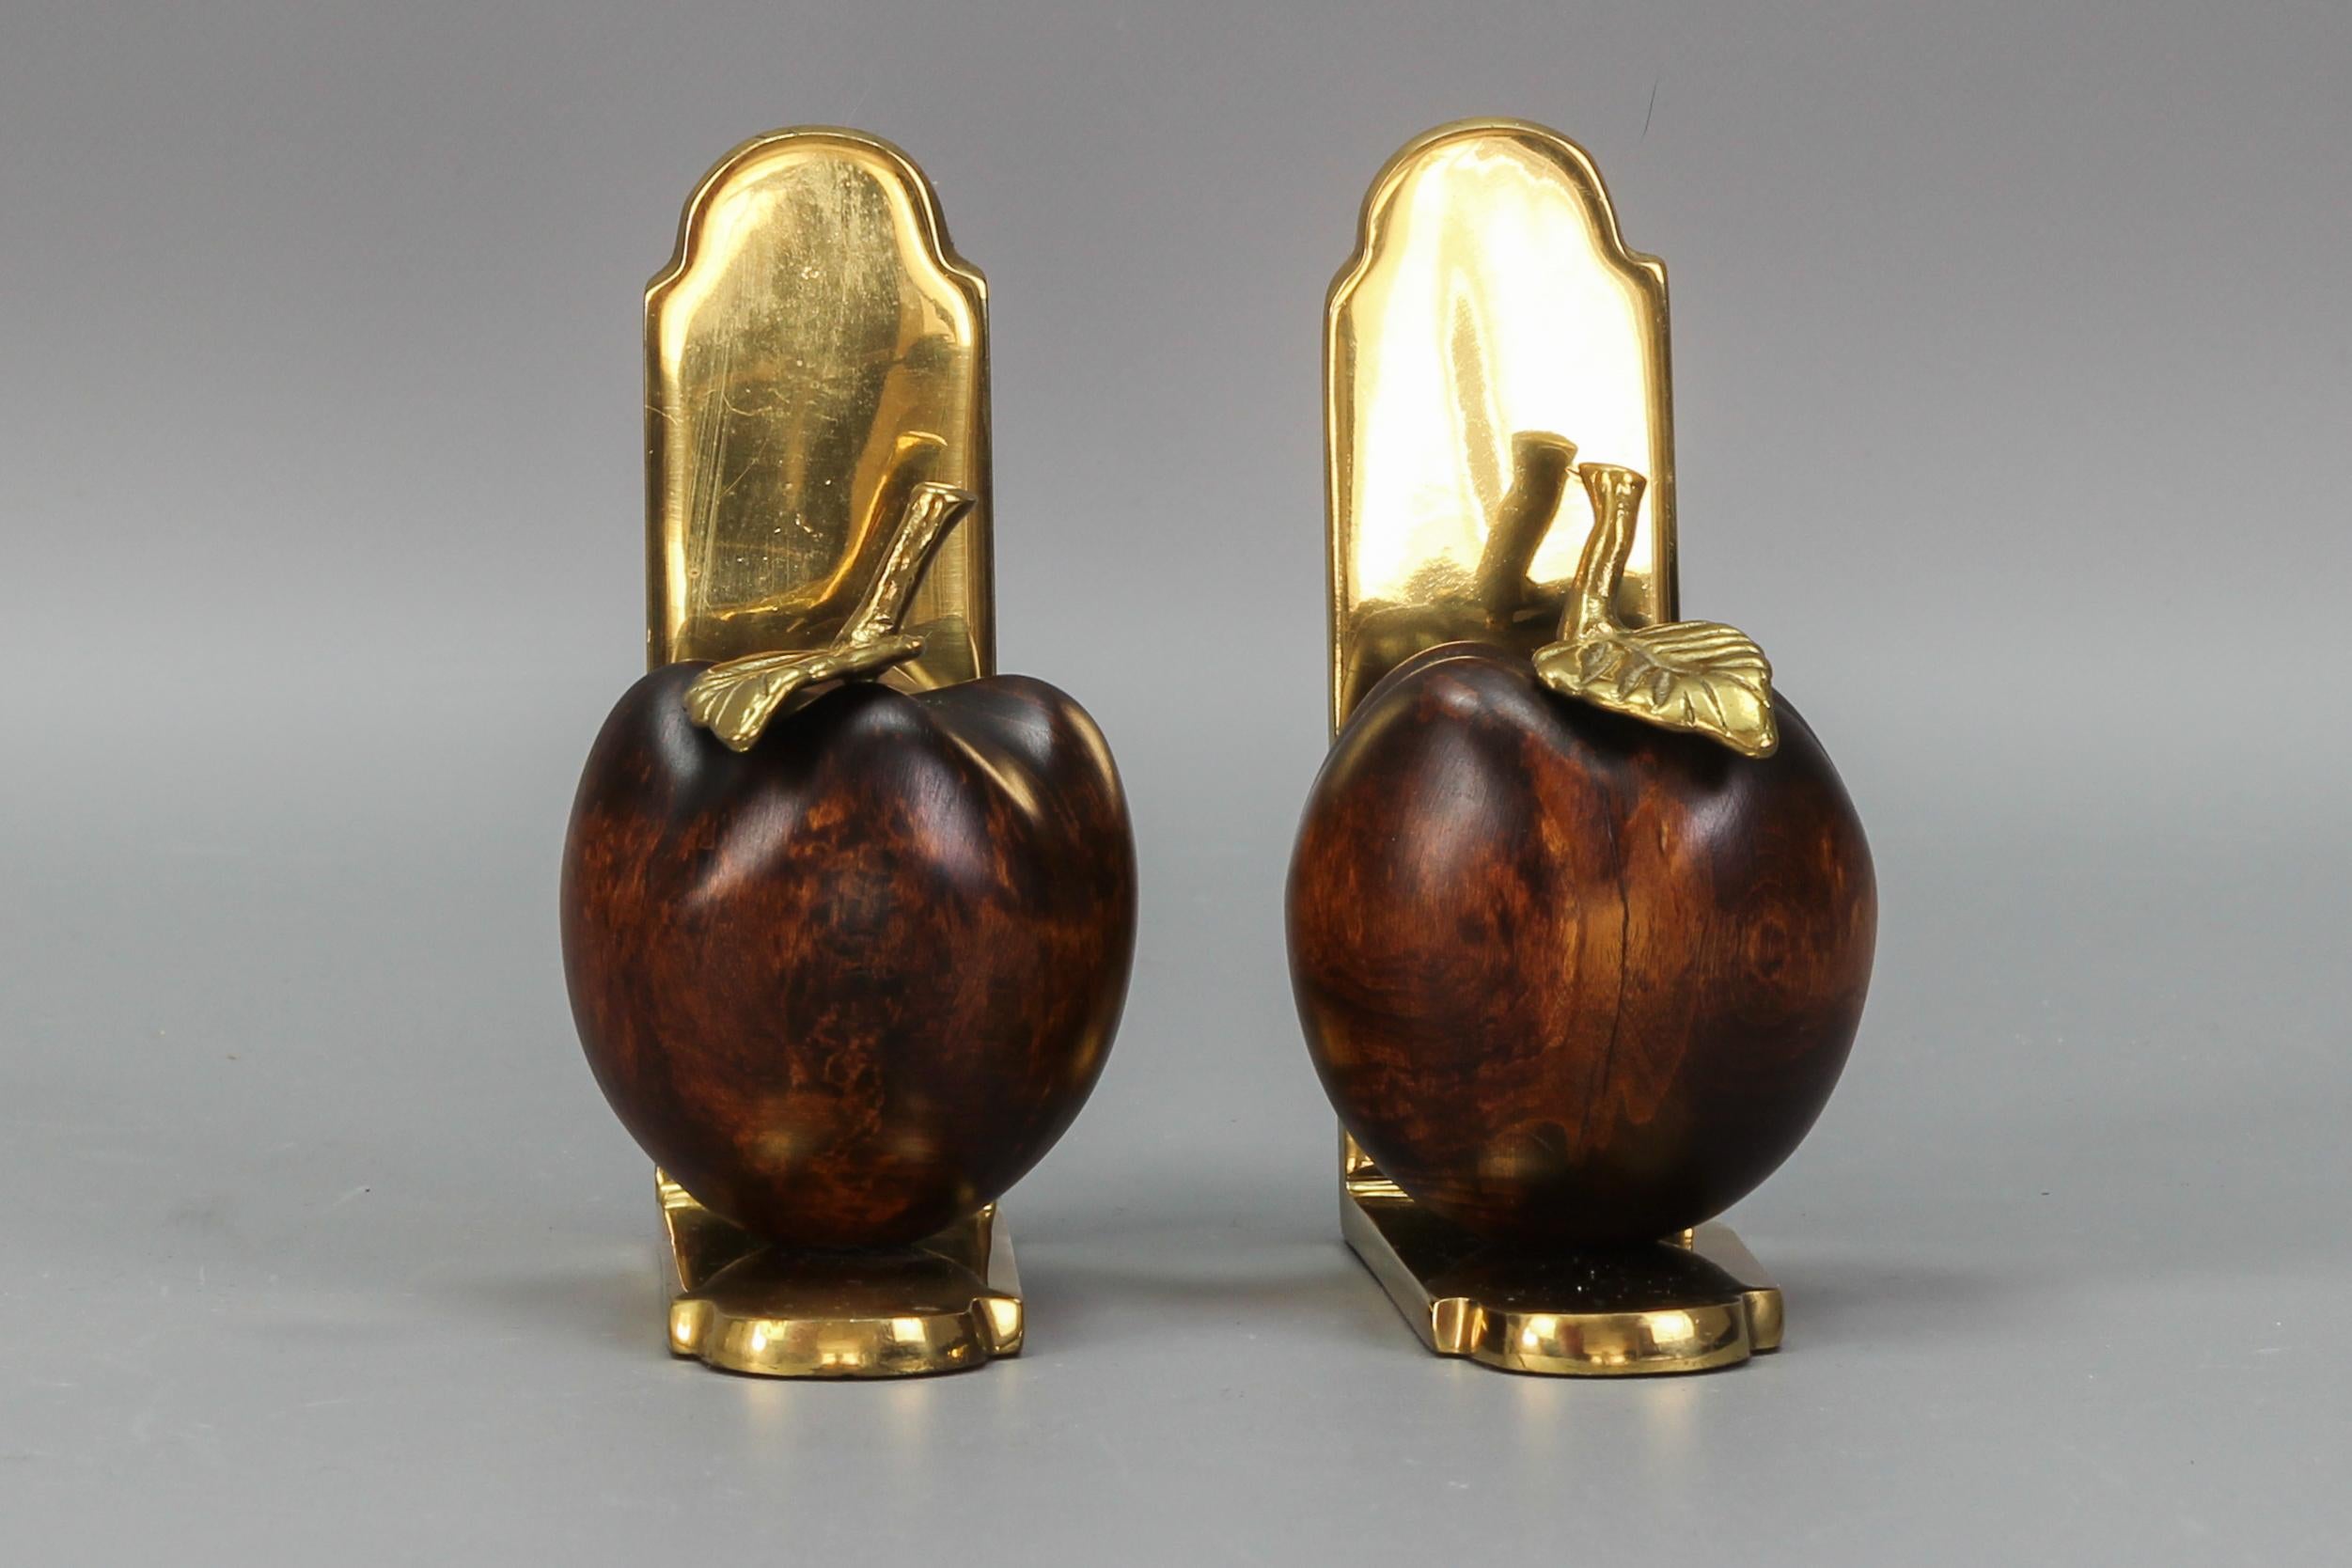 Vintage brass and wooden apple bookends.
Beautiful bookends, each with a wooden apple sculpture with a brass apple stem and leaf, mounted on brass bases. Germany, circa 1970.
Dimensions: height: 14 cm / 5.51 in; width: 7 cm / 2.75 in; depth: 12.5 cm